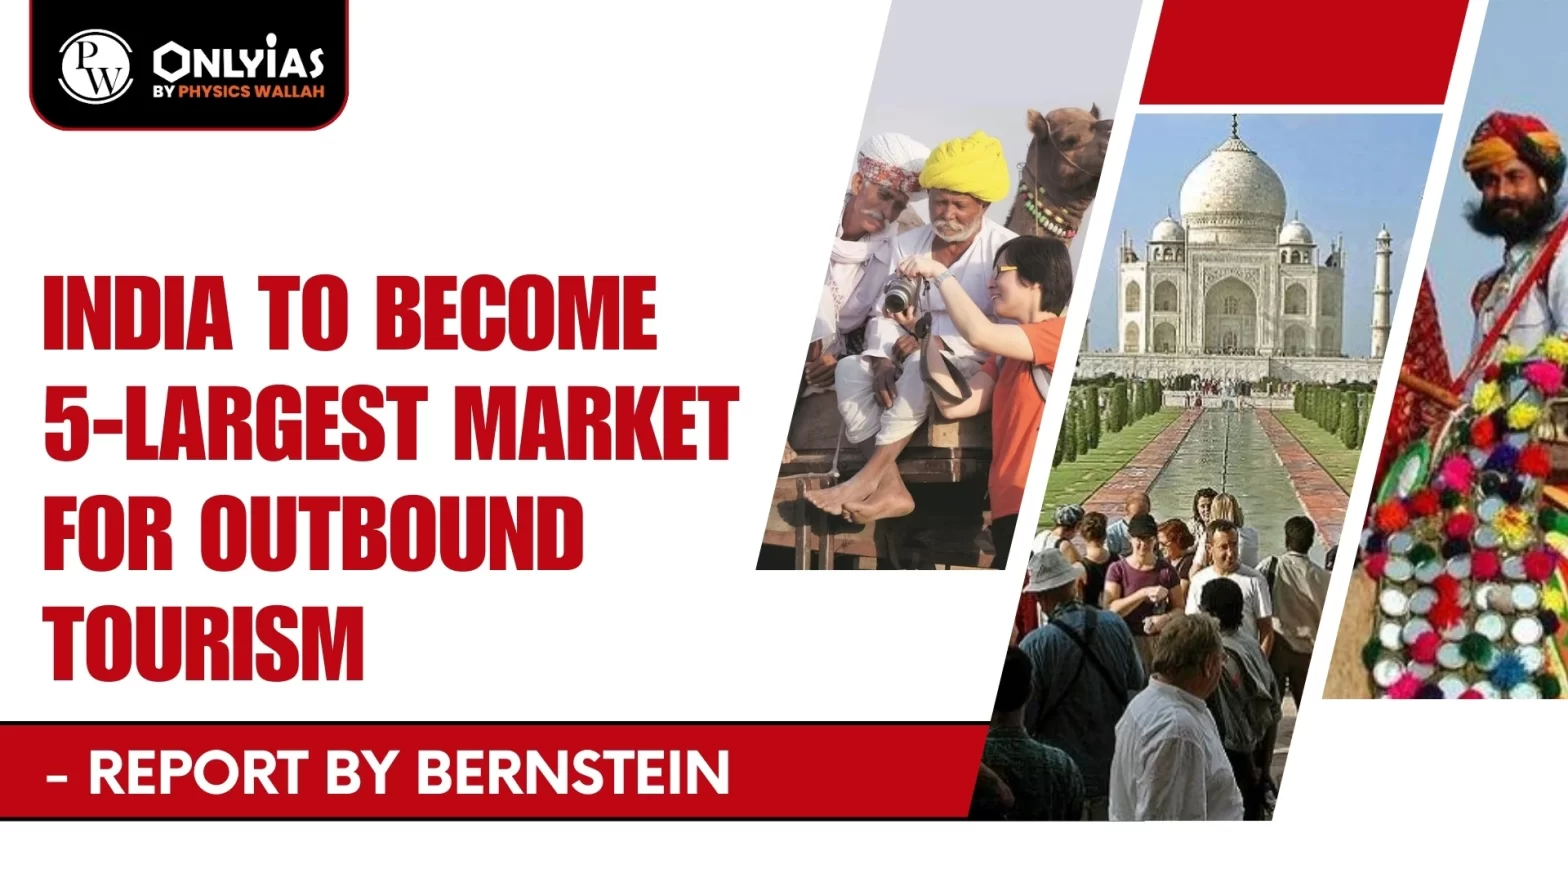 India to Become 5-largest Market for Outbound Tourism: Report by Bernstein